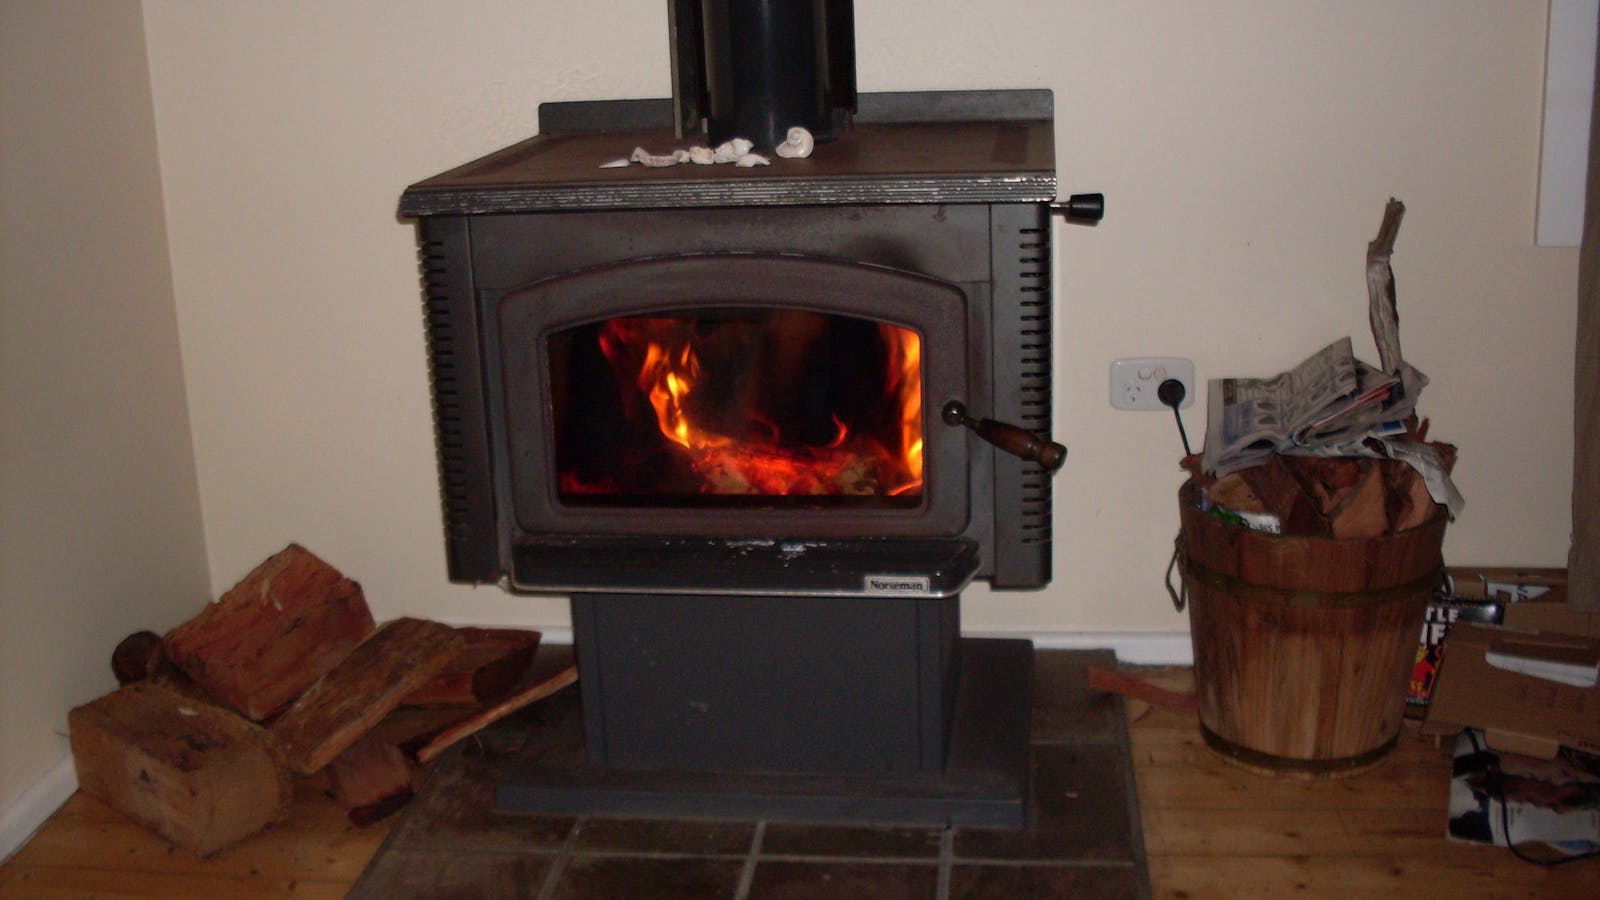 Cosy wood fire - perfect for cooler months